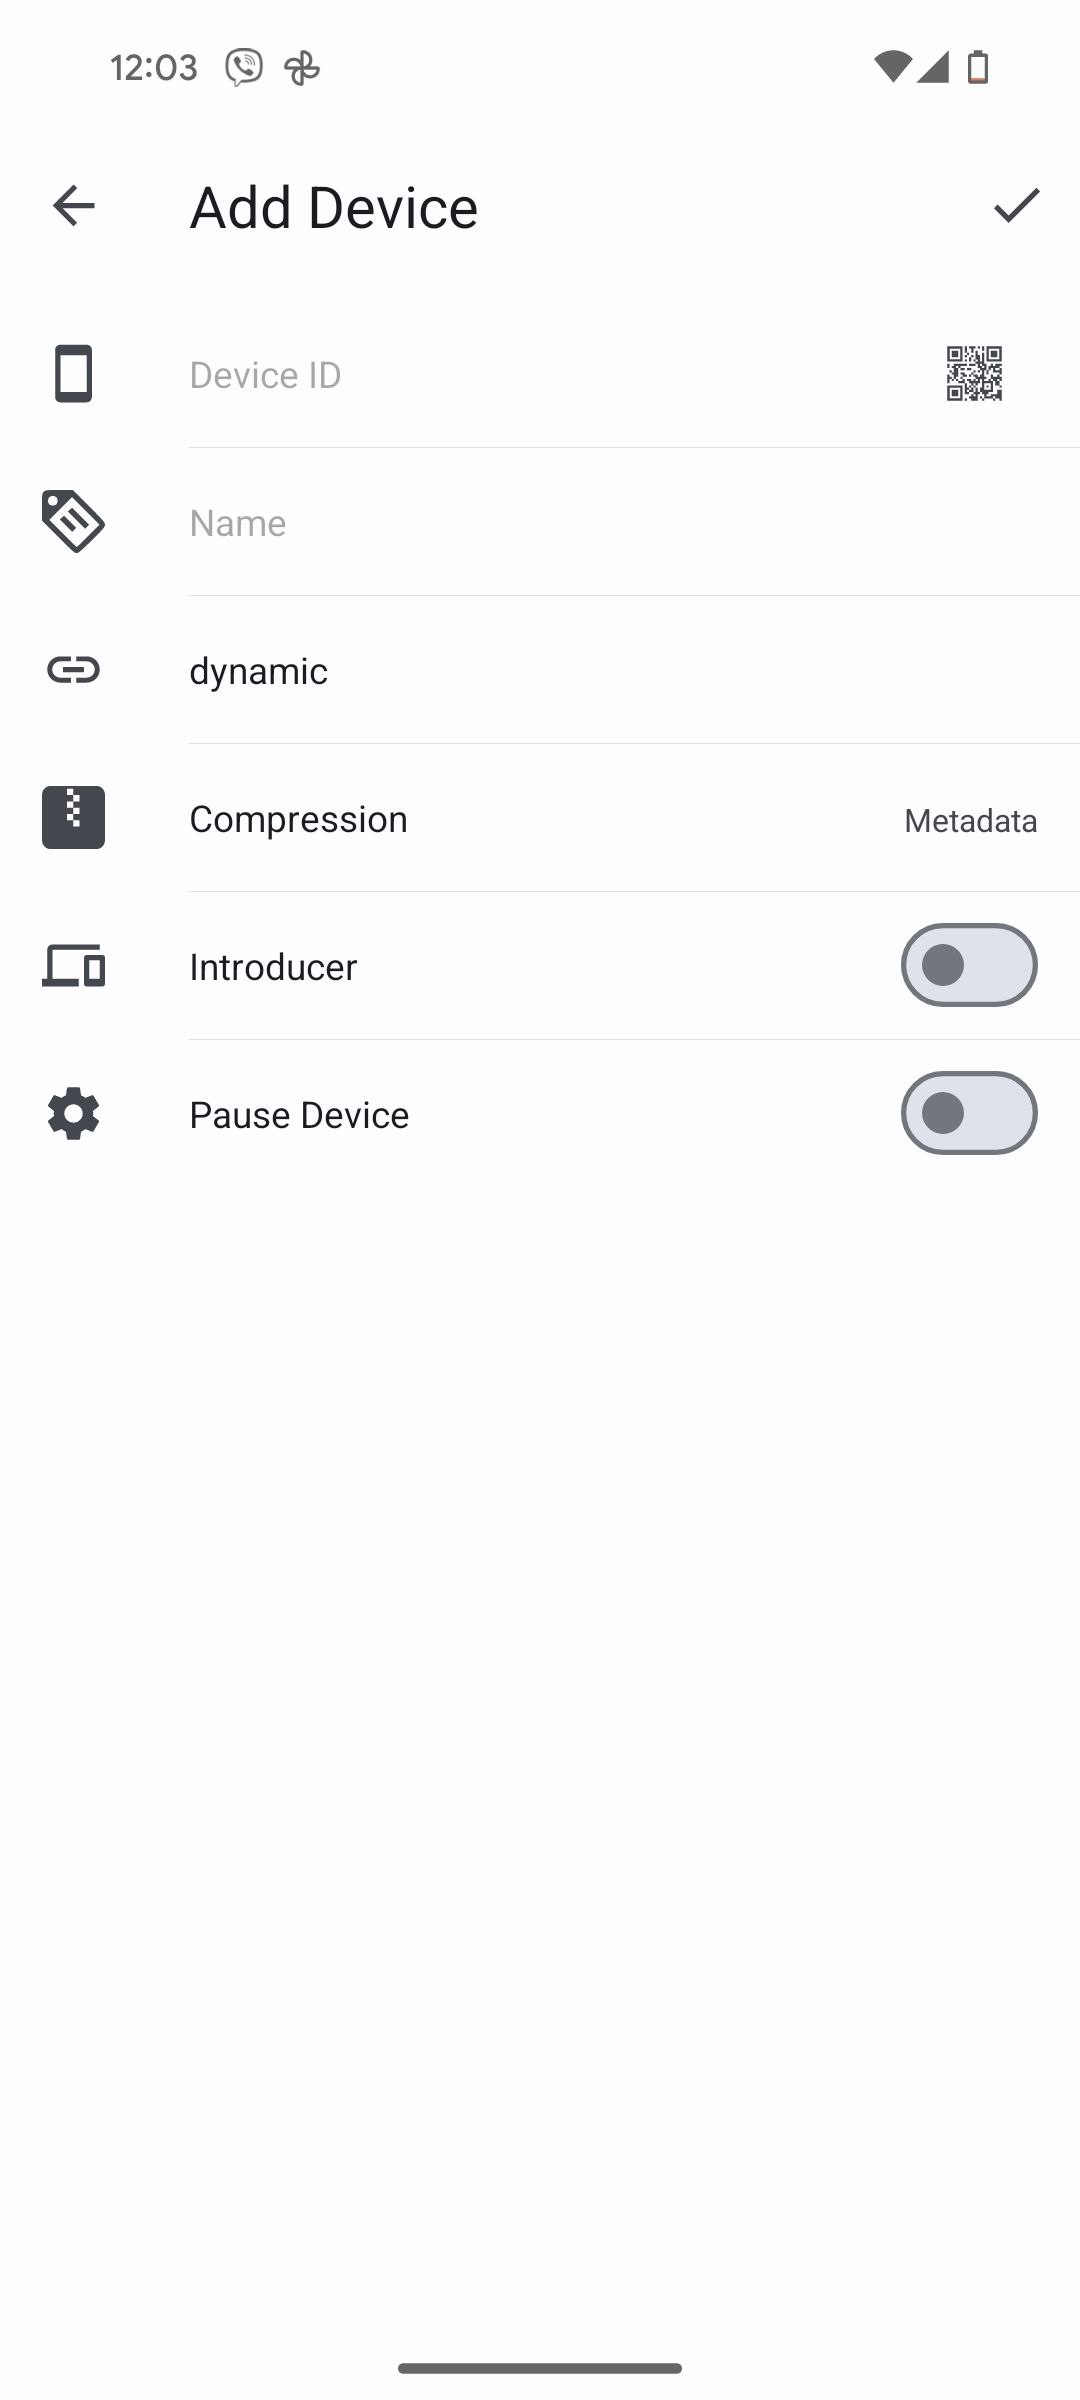 syncthing add device page on your phone